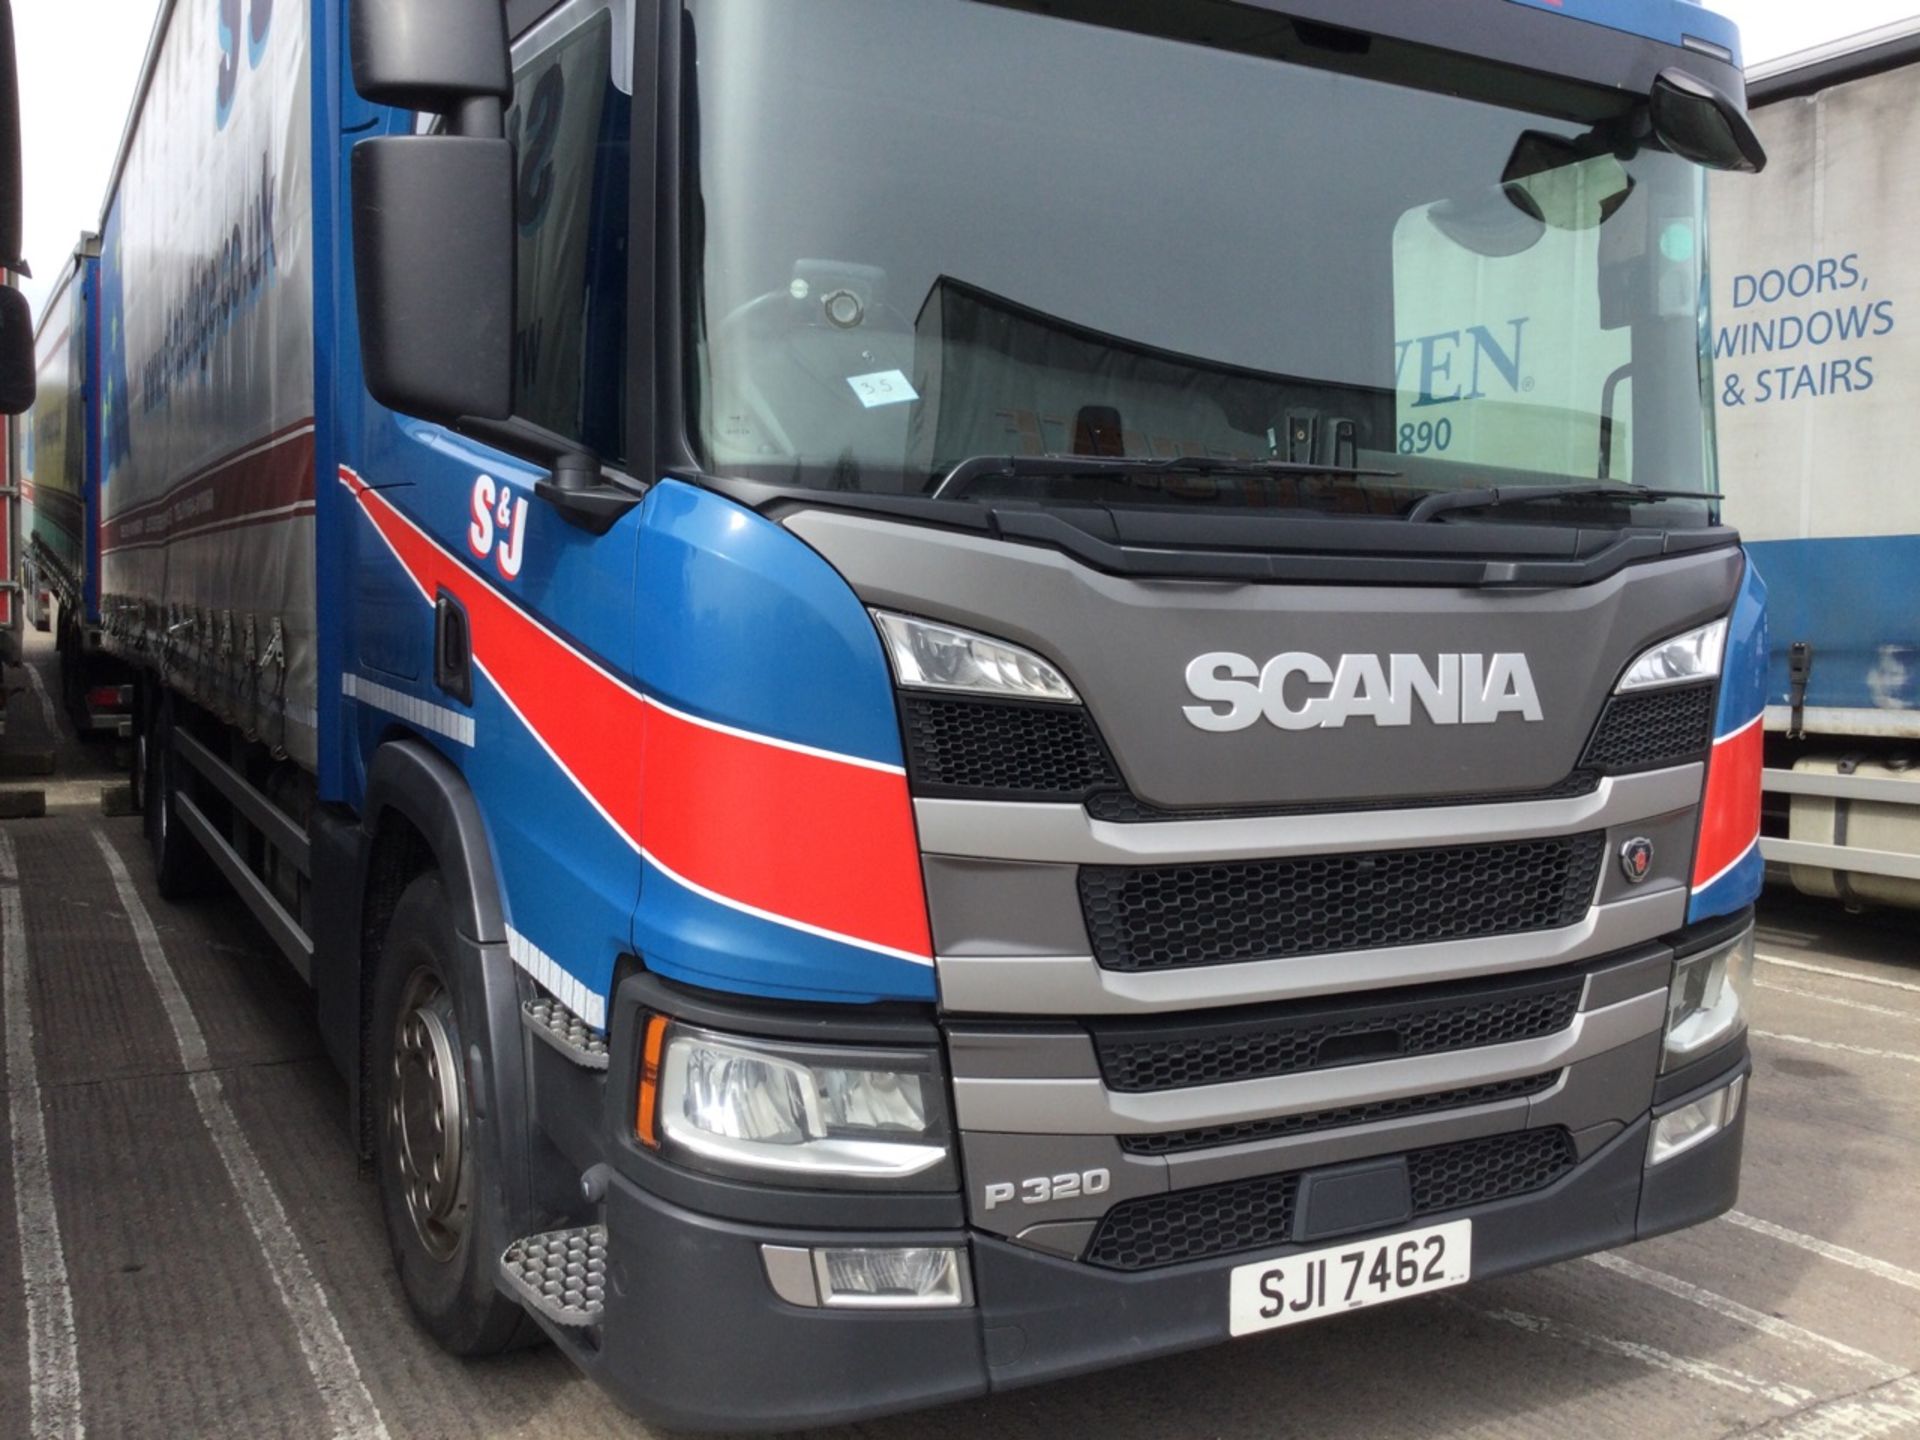 Scania P320 6x2 Rigid Curtainsider With Rear Lift Axle, Fork Truck Mounts, Sleeper Cab301192kmsYear - Image 2 of 5